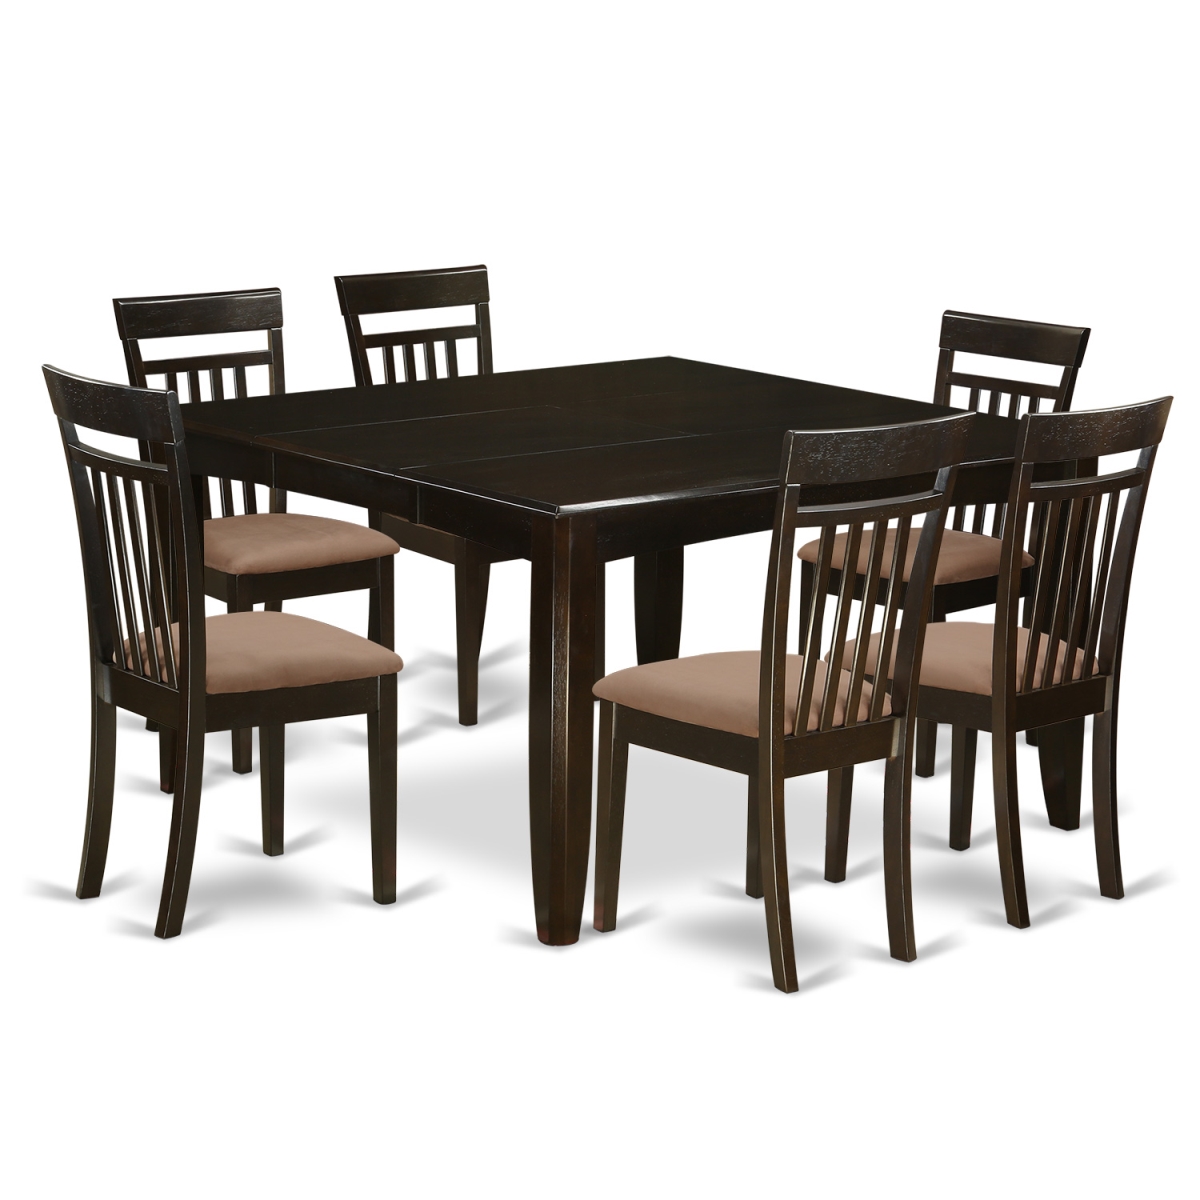 PFCA7-CAP-C Dining Room Set for 6-Dinette Table with Leaf & 6 Dinette Chairs, 7 piece - Cappuccino -  East West Furniture